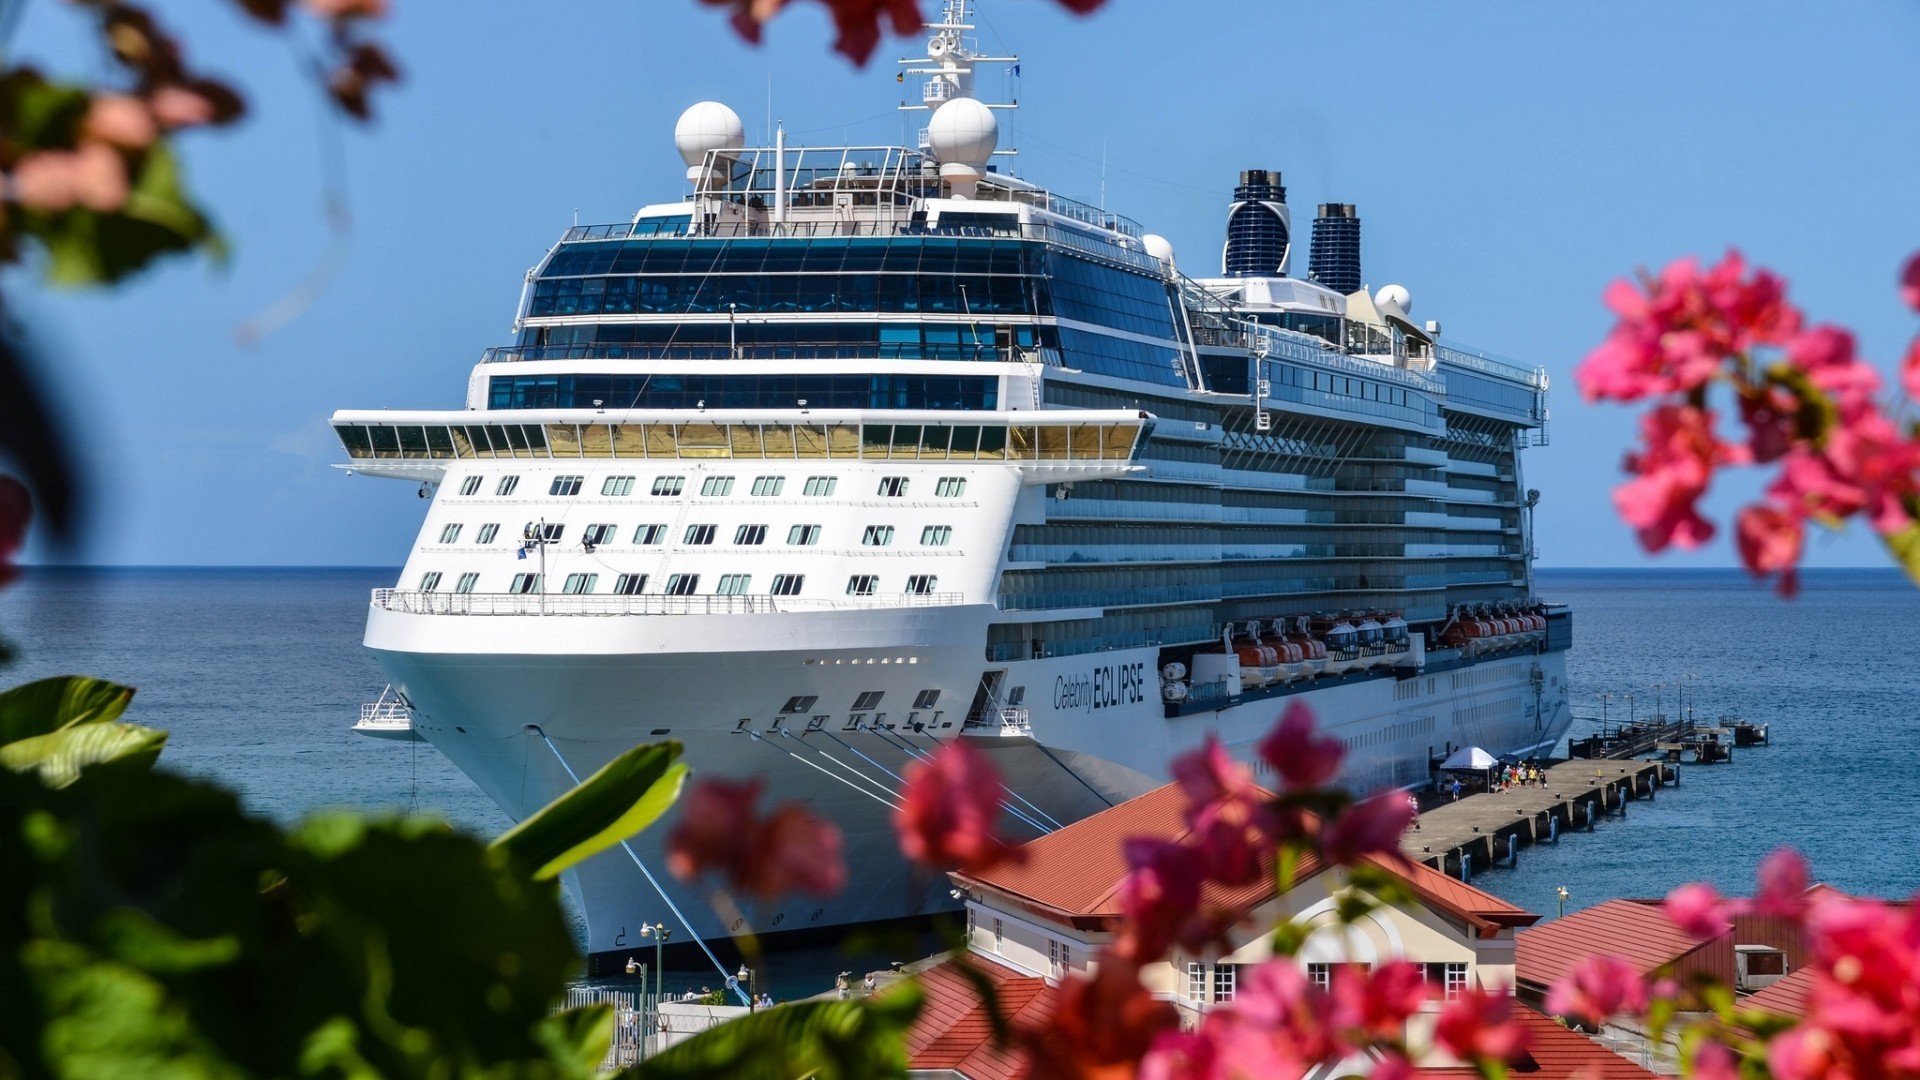 large ships and liners water travel cruise ship watercraft ship sea transportation system sail sky outdoors harbor ocean vehicle boat tourism pier liner